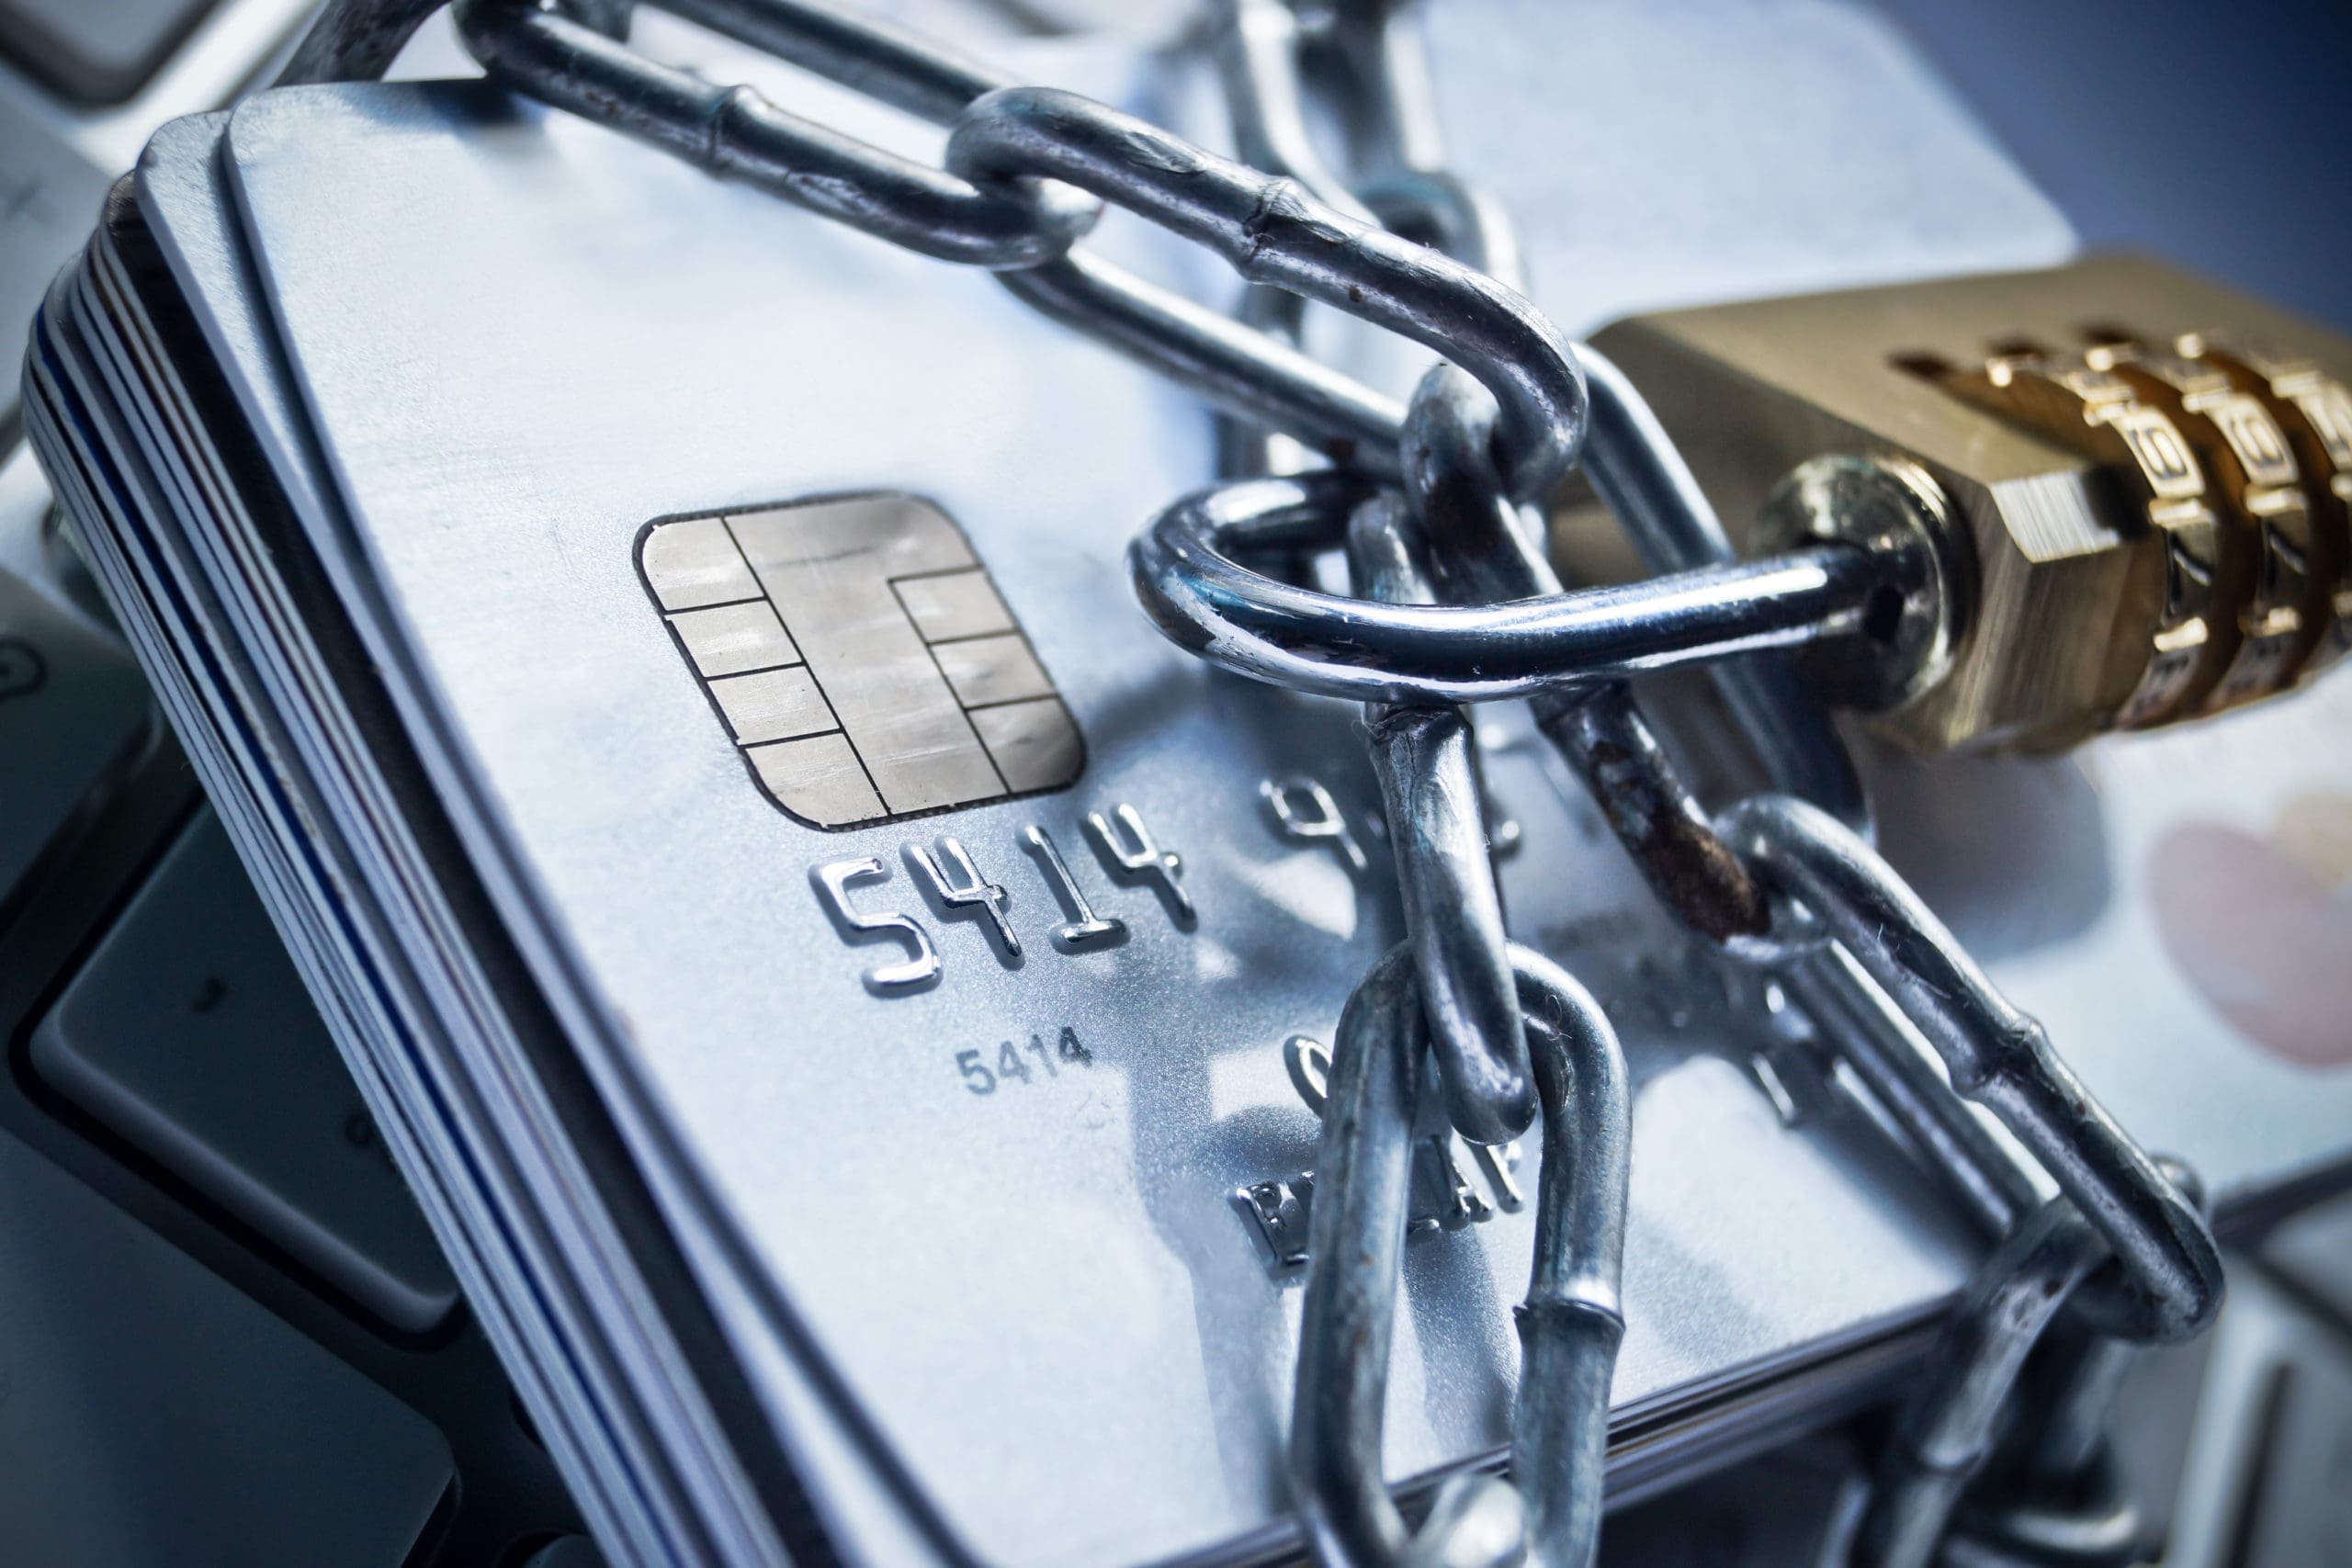 Eight Ways Small Businesses Can Protect Their Business and Payment Card Data